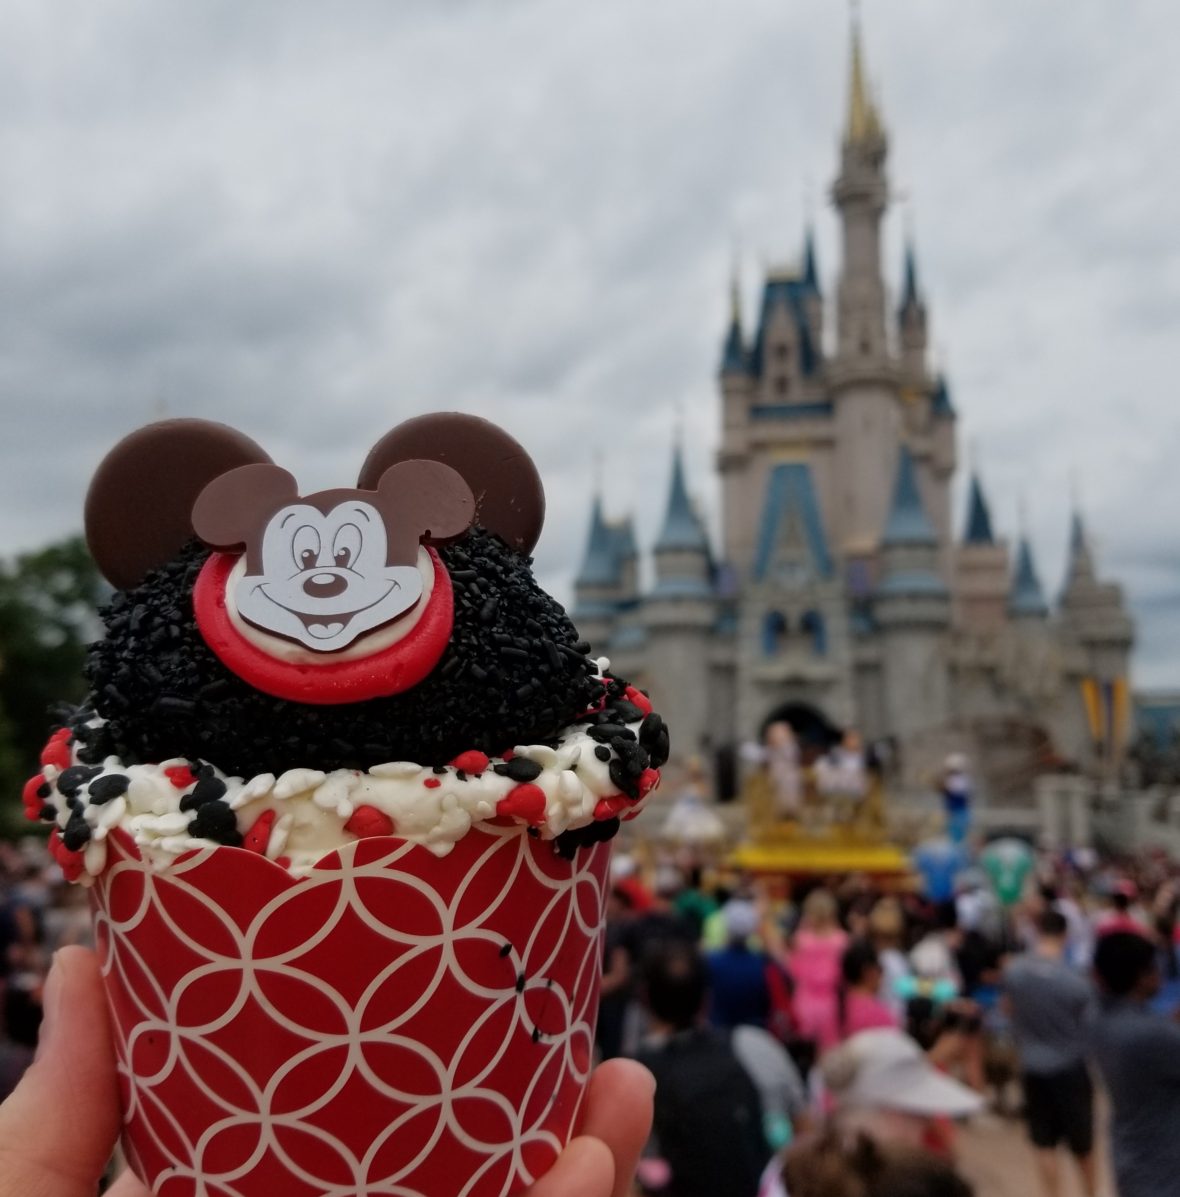 The Mouseketeer Cupcake available at the Main Street Bakery in Front of Cinderella Castle in the Magic Kingdom